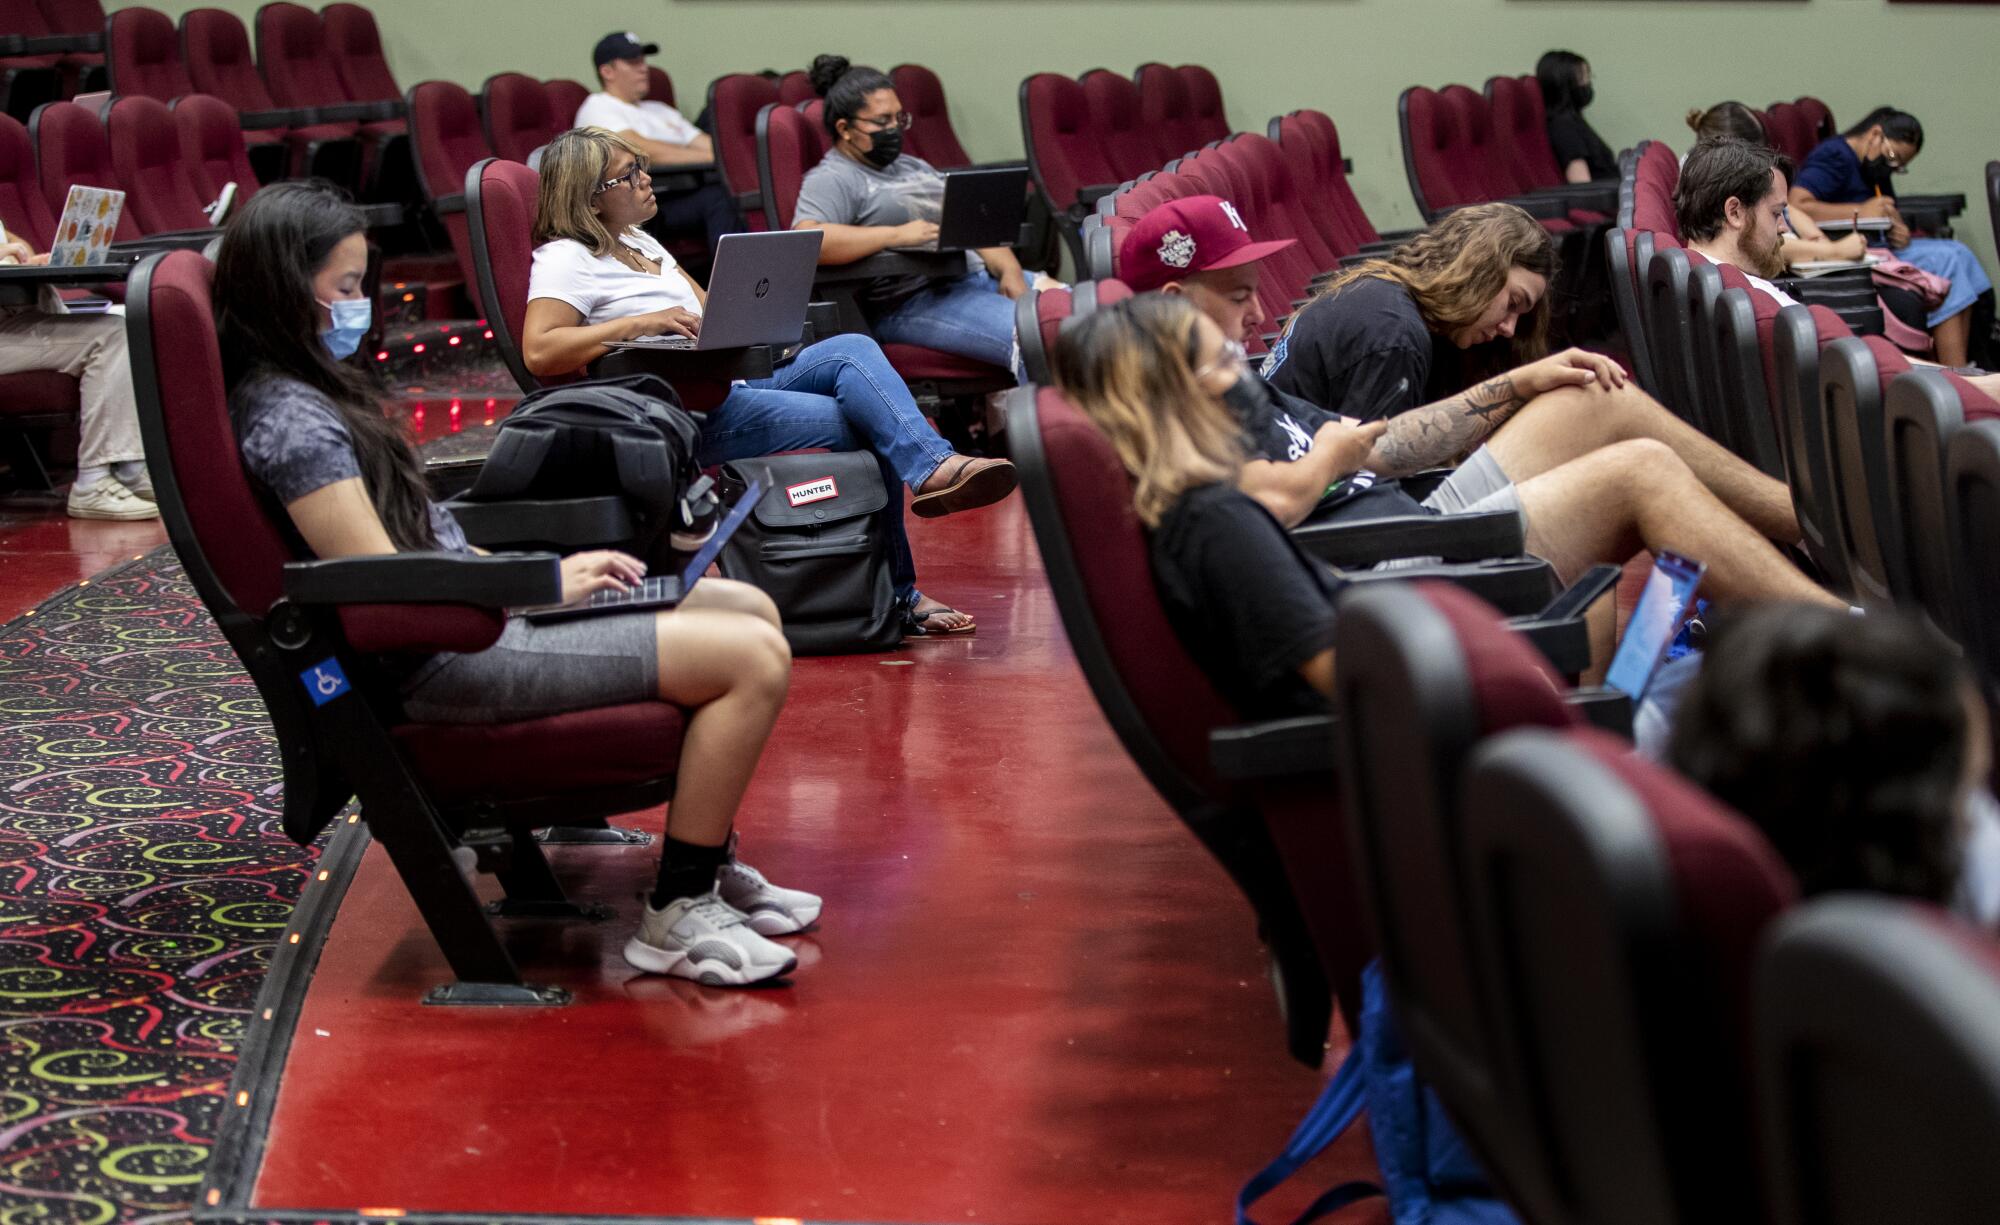 UC Riverside students attend a criminology class at a movie theater about a mile from campus.